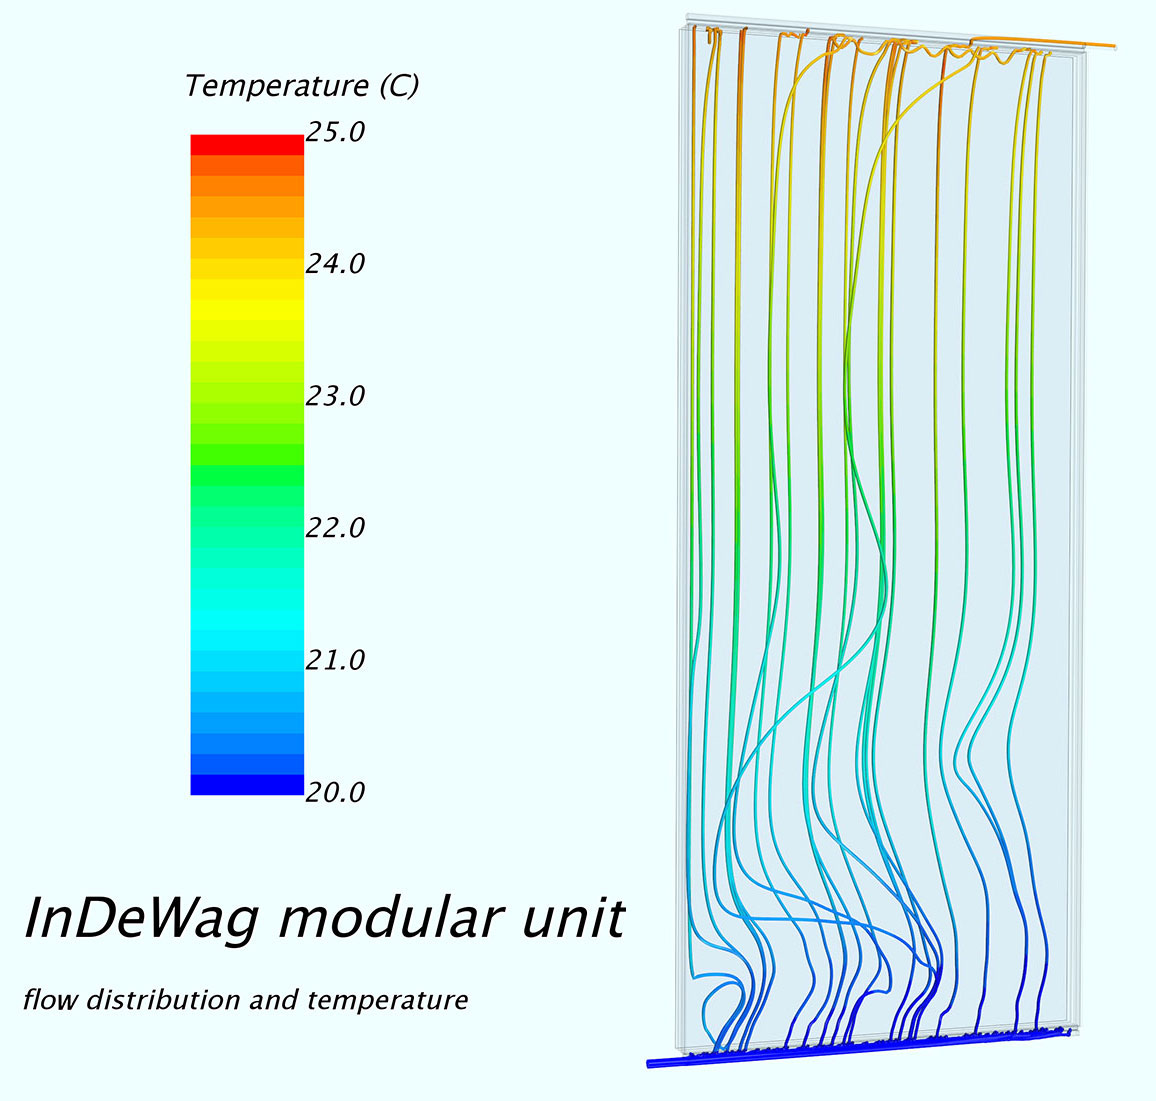 Flow distribution and temperature, image: HTCO